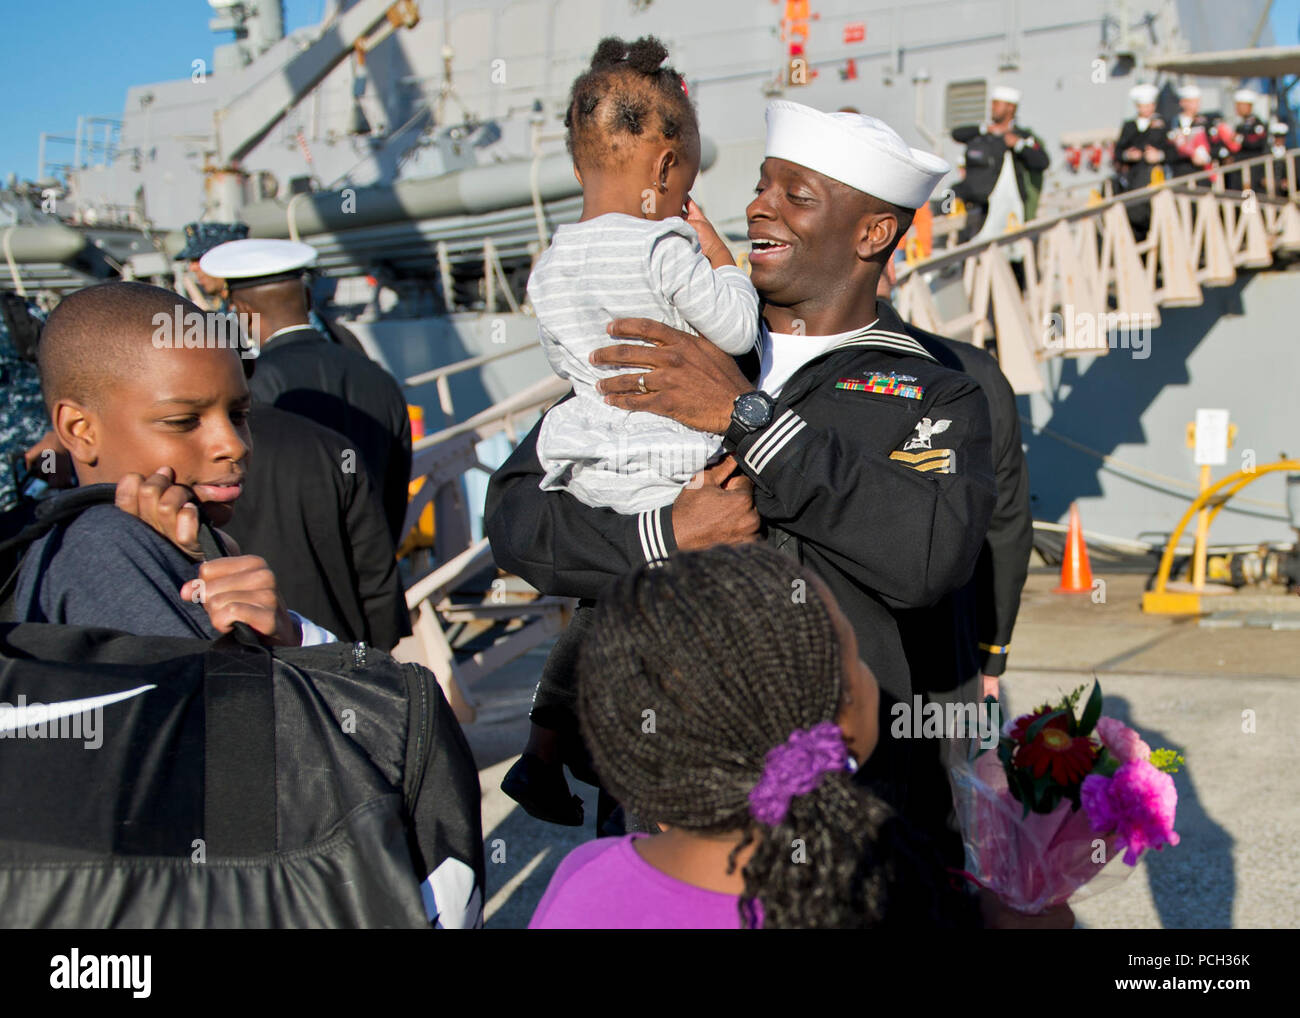 YOKOSUKA, Japan (Nov. 16, 2012) Culinary Specialist 1st Class Tony Alston greets his children during a homecoming event for the Arleigh Burke-class guided-missile destroyer USS Stethem (DDG 63) at Fleet Activities, Yokosuka. Stethem is assigned to Destroyer Squadron (DESRON) 15 and forward deployed to Yokosuka, Japan. The U.S. Navy is constantly deployed to preserve peace, protect commerce, and deter aggression through forward presence. Join the conversation on social media using #warfighting. Stock Photo